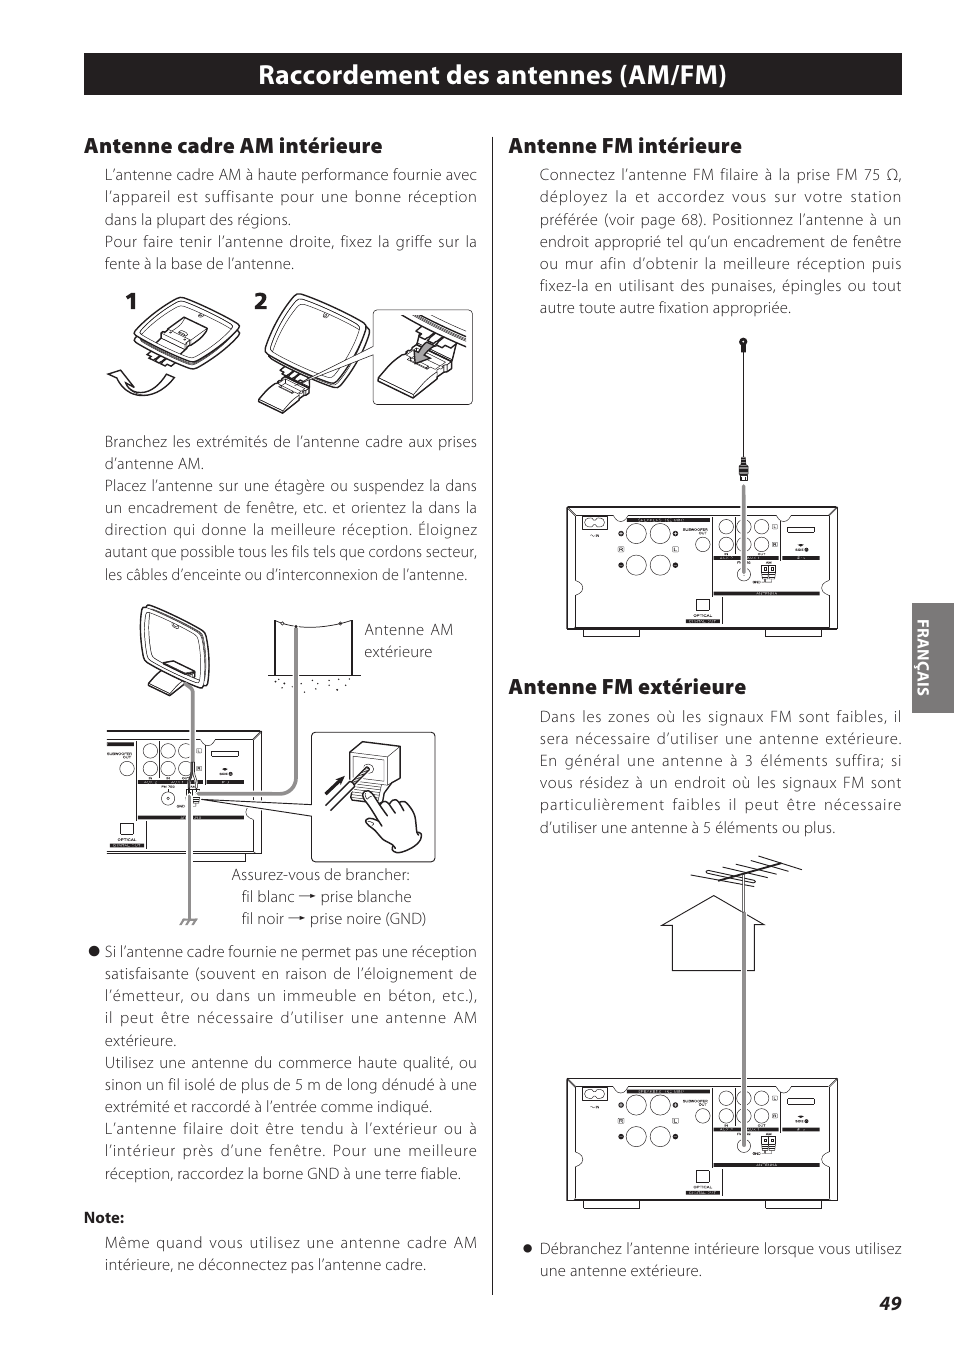 Raccordement des antennes (am/fm), Antenne cadre am intérieure, Antenne fm intérieure | Antenne fm extérieure | Teac CD Receiver CR-H238i User Manual | Page 49 / 118